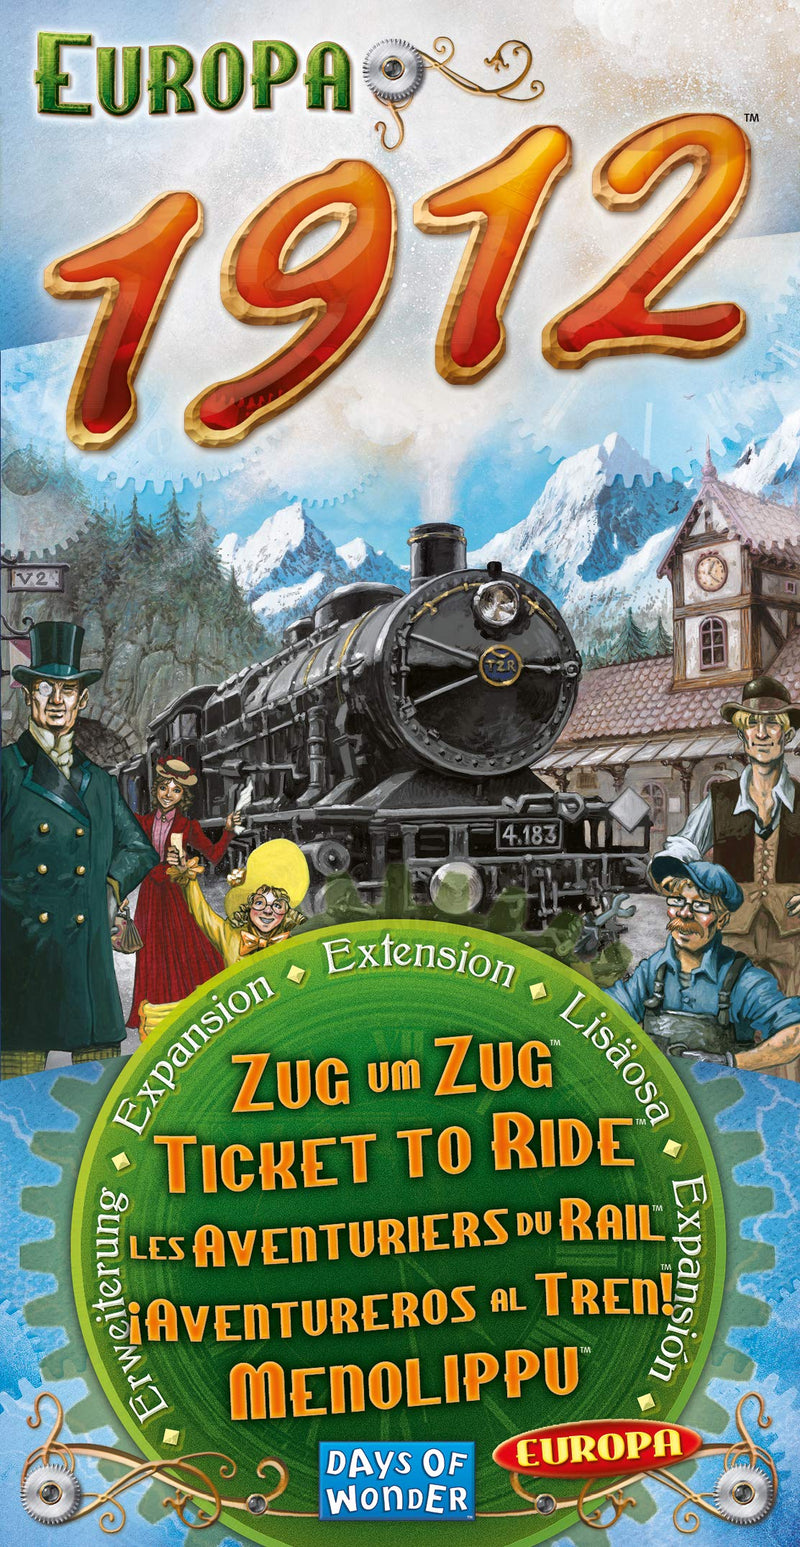 Ticket to Ride Europa 1912 Expansion (Family Board Game for 2-5 Players, 8+) by Days of Wonder